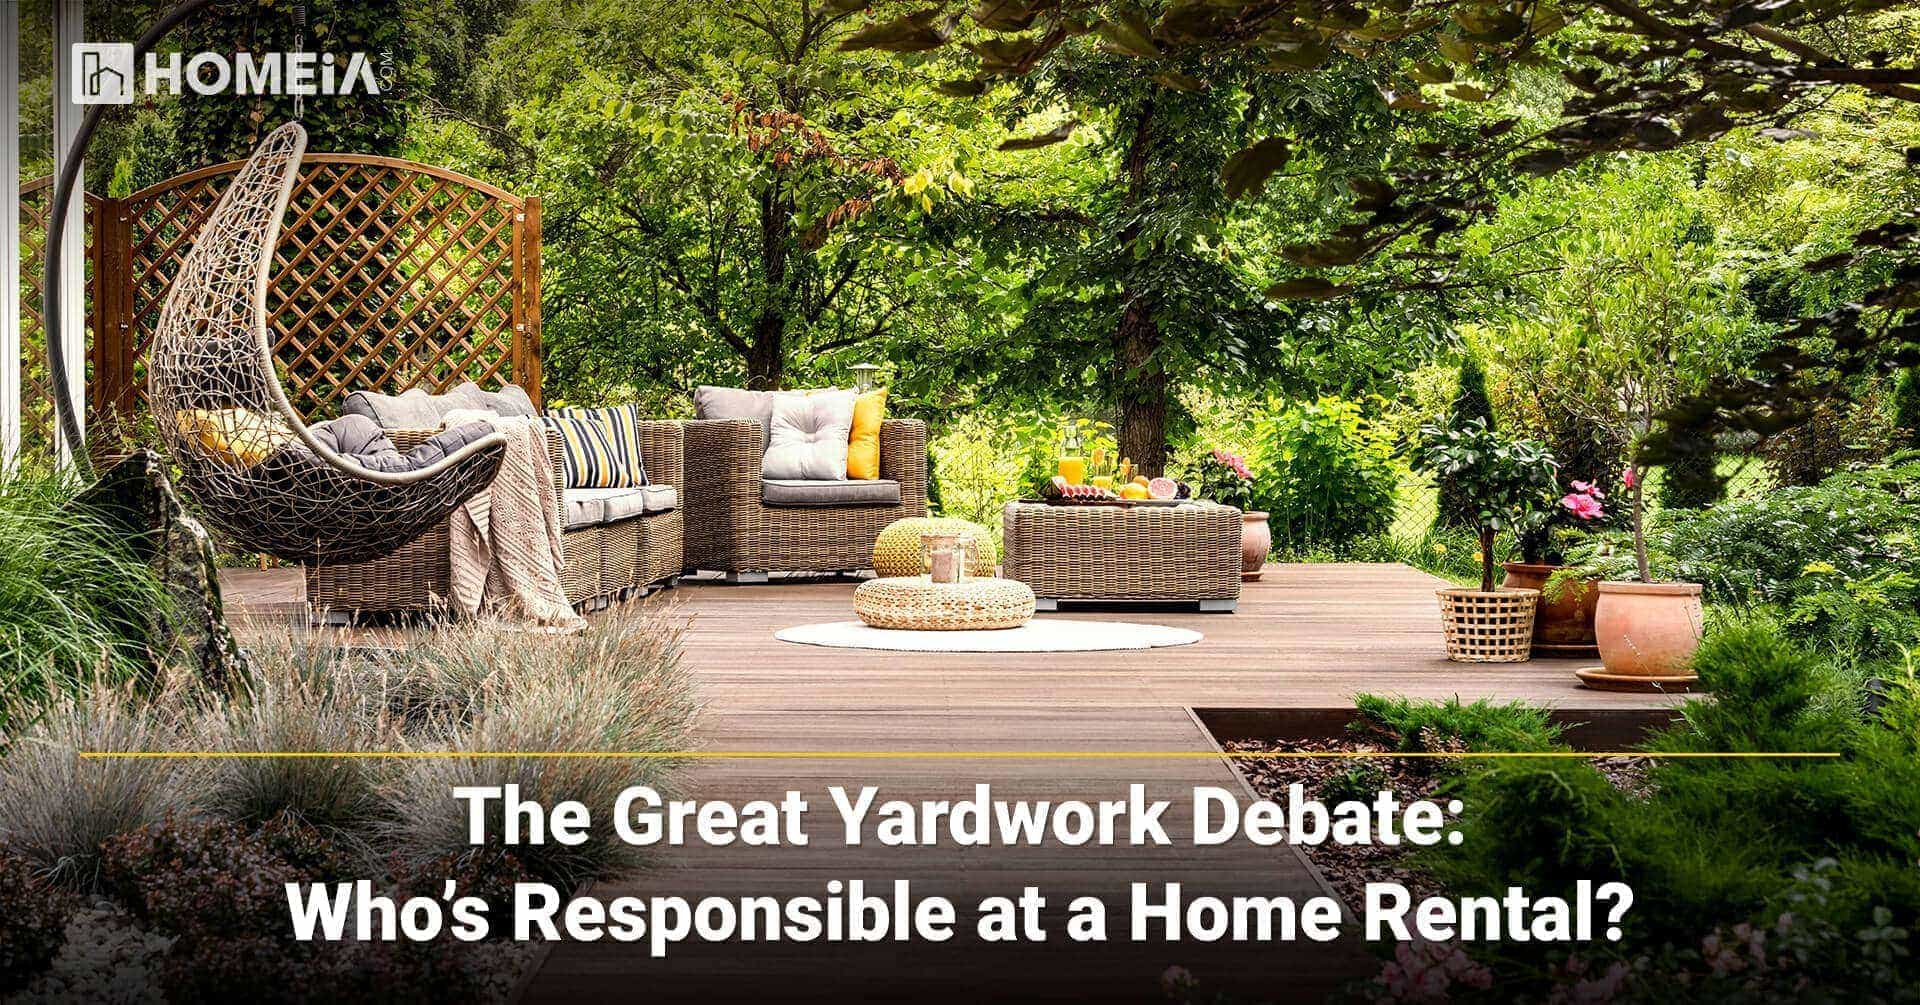 The Great Yardwork Debate: Who’s Responsible at a Home Rental?